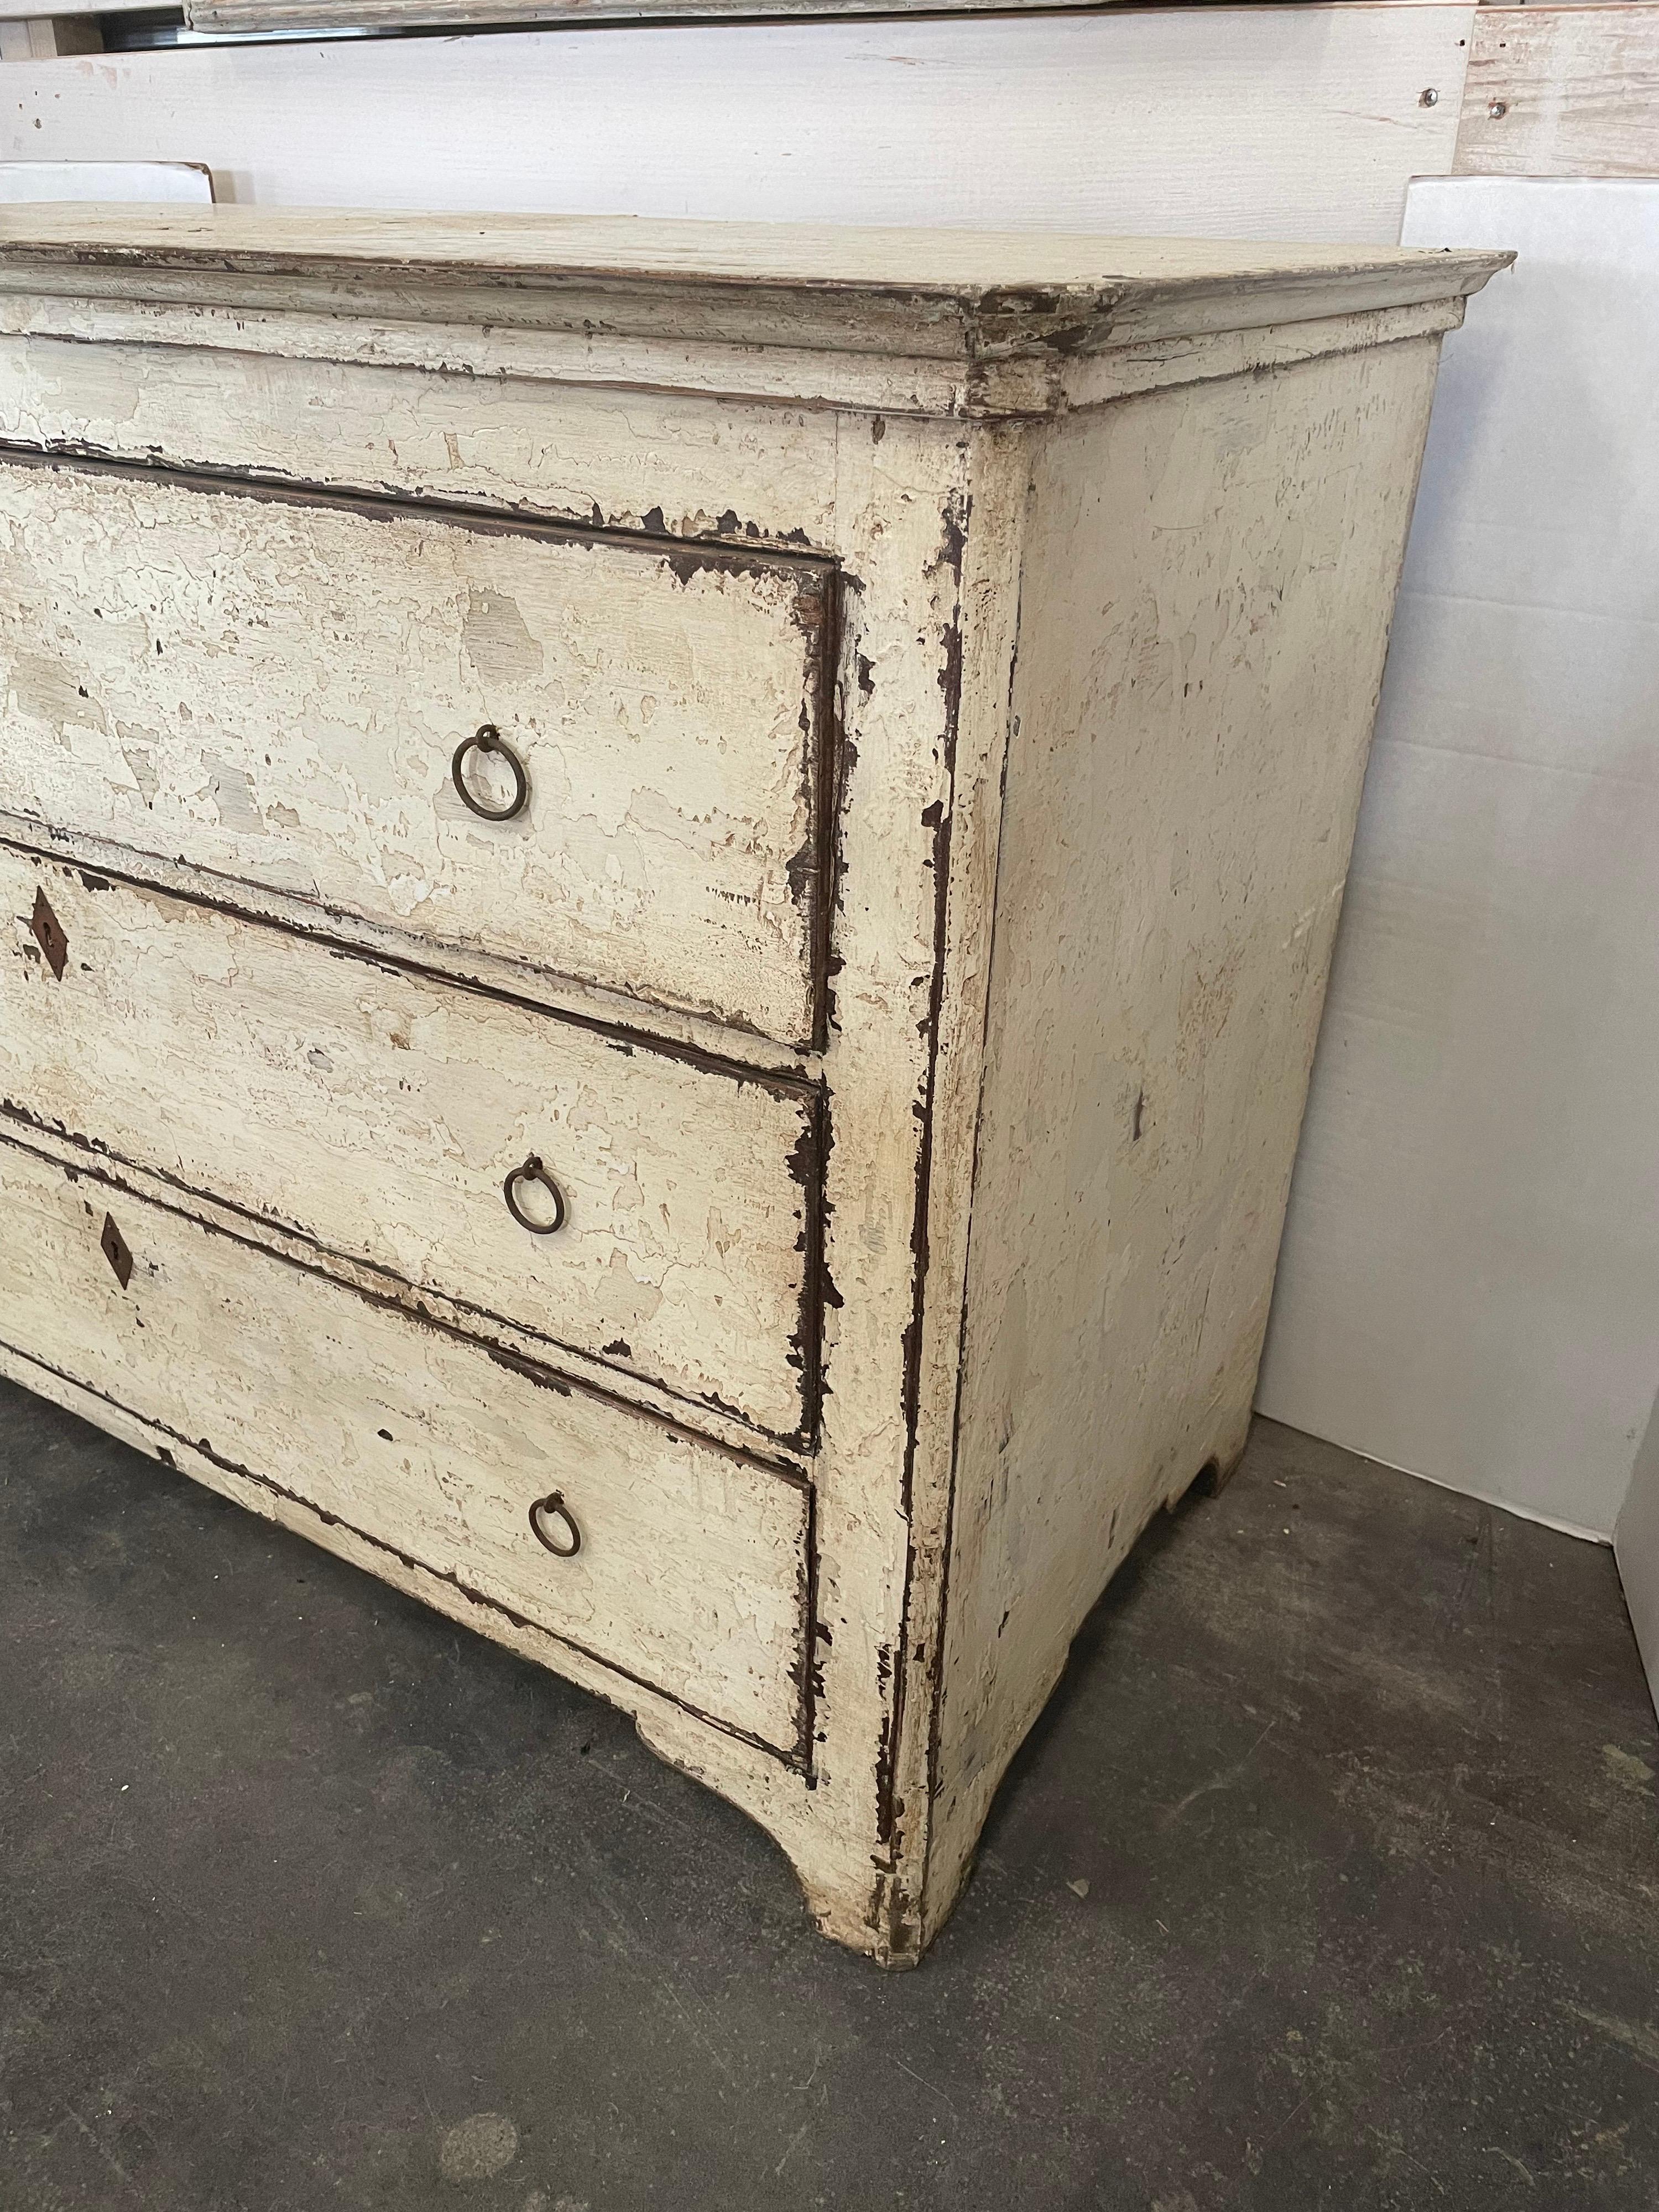 This is a beautiful chest with round aged pulls. It’s from Spanish origin made from old buffets, chests and newer wood. The paint is newly done the old way using a layering technique. You can see in the photos the variation of paints used.